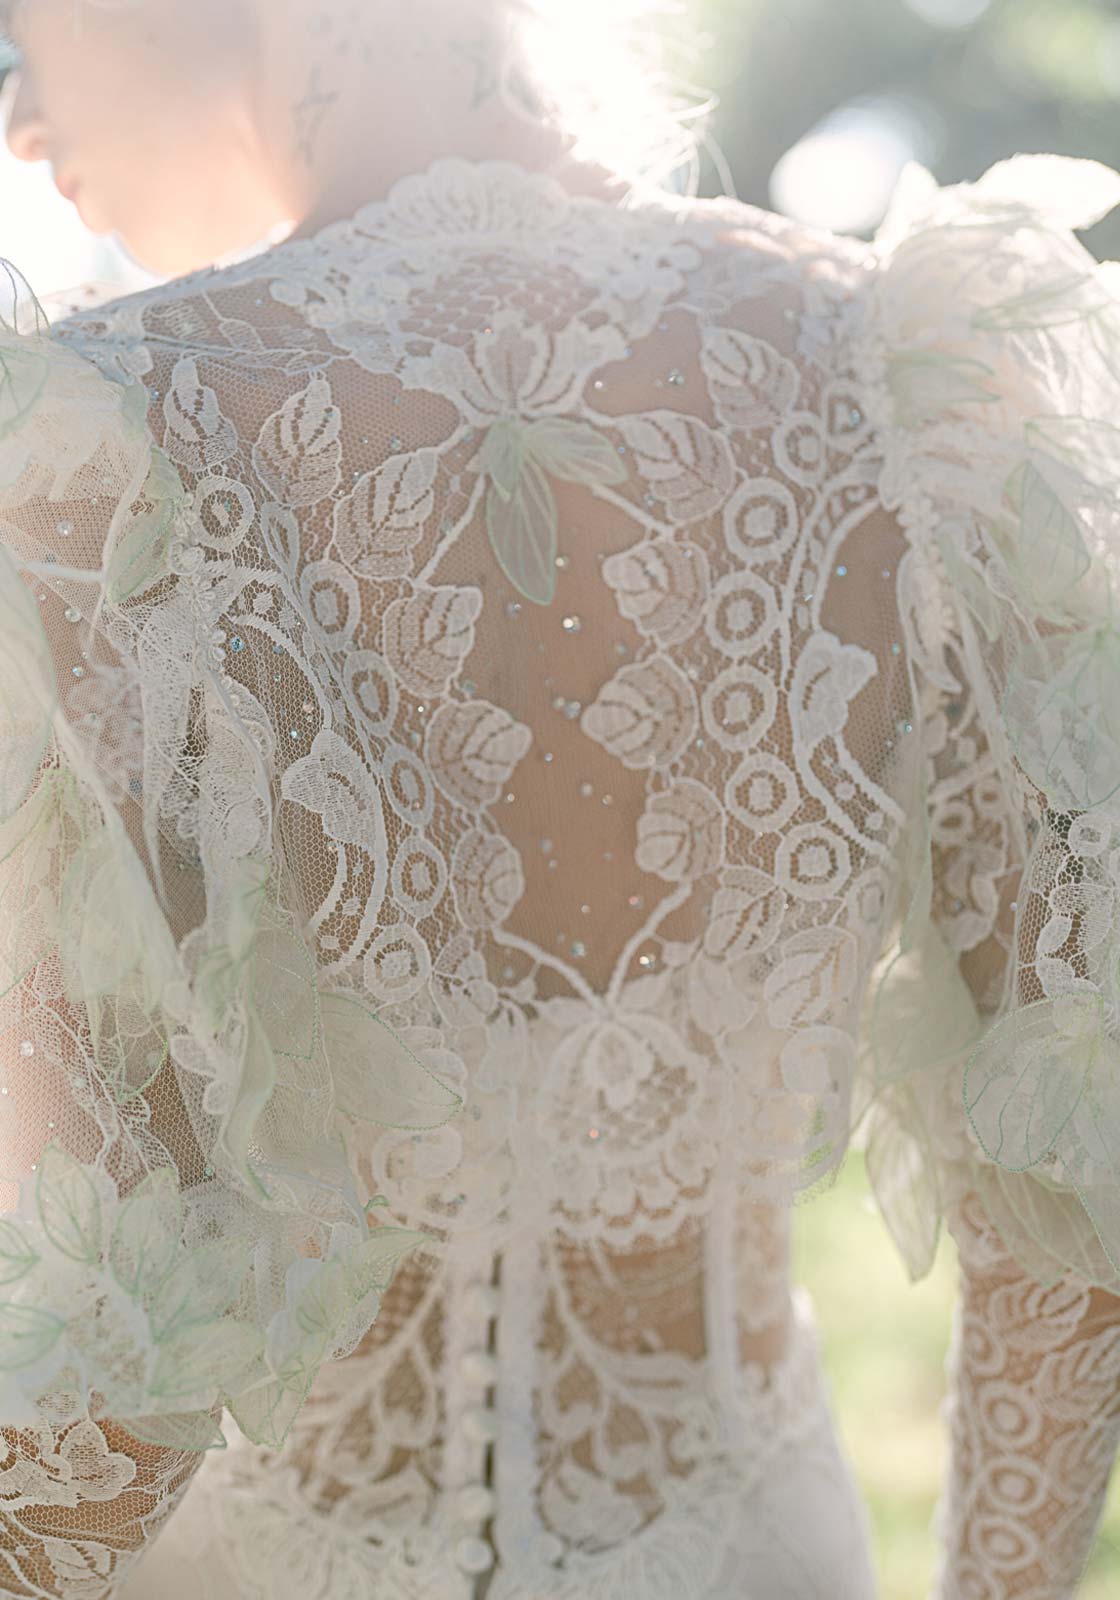 Back detail of lace from the Everglade Wedding Jacket